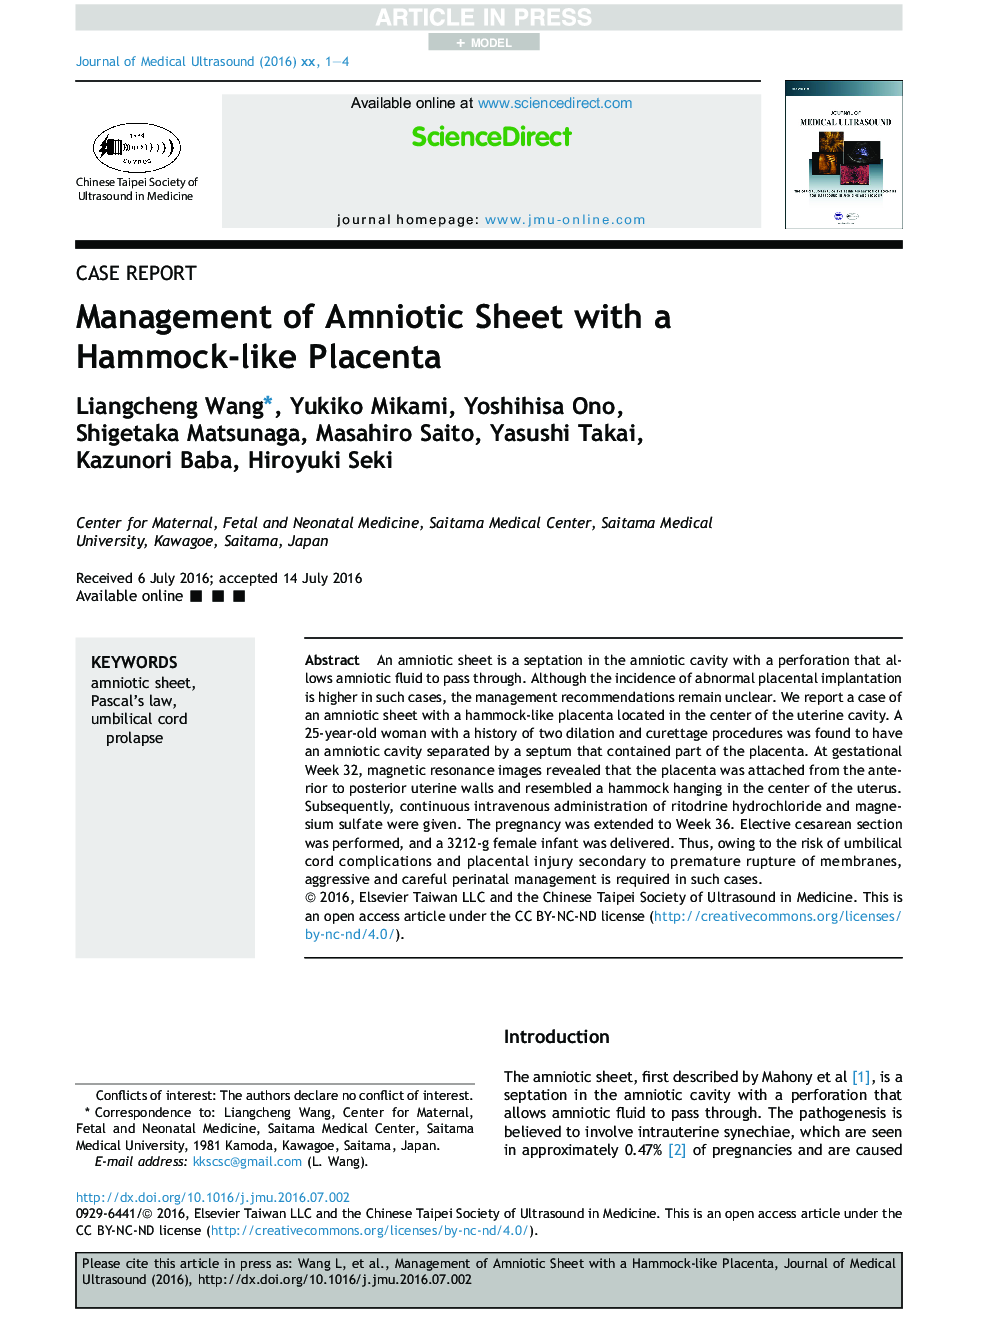 Management of Amniotic Sheet with a Hammock-like Placenta